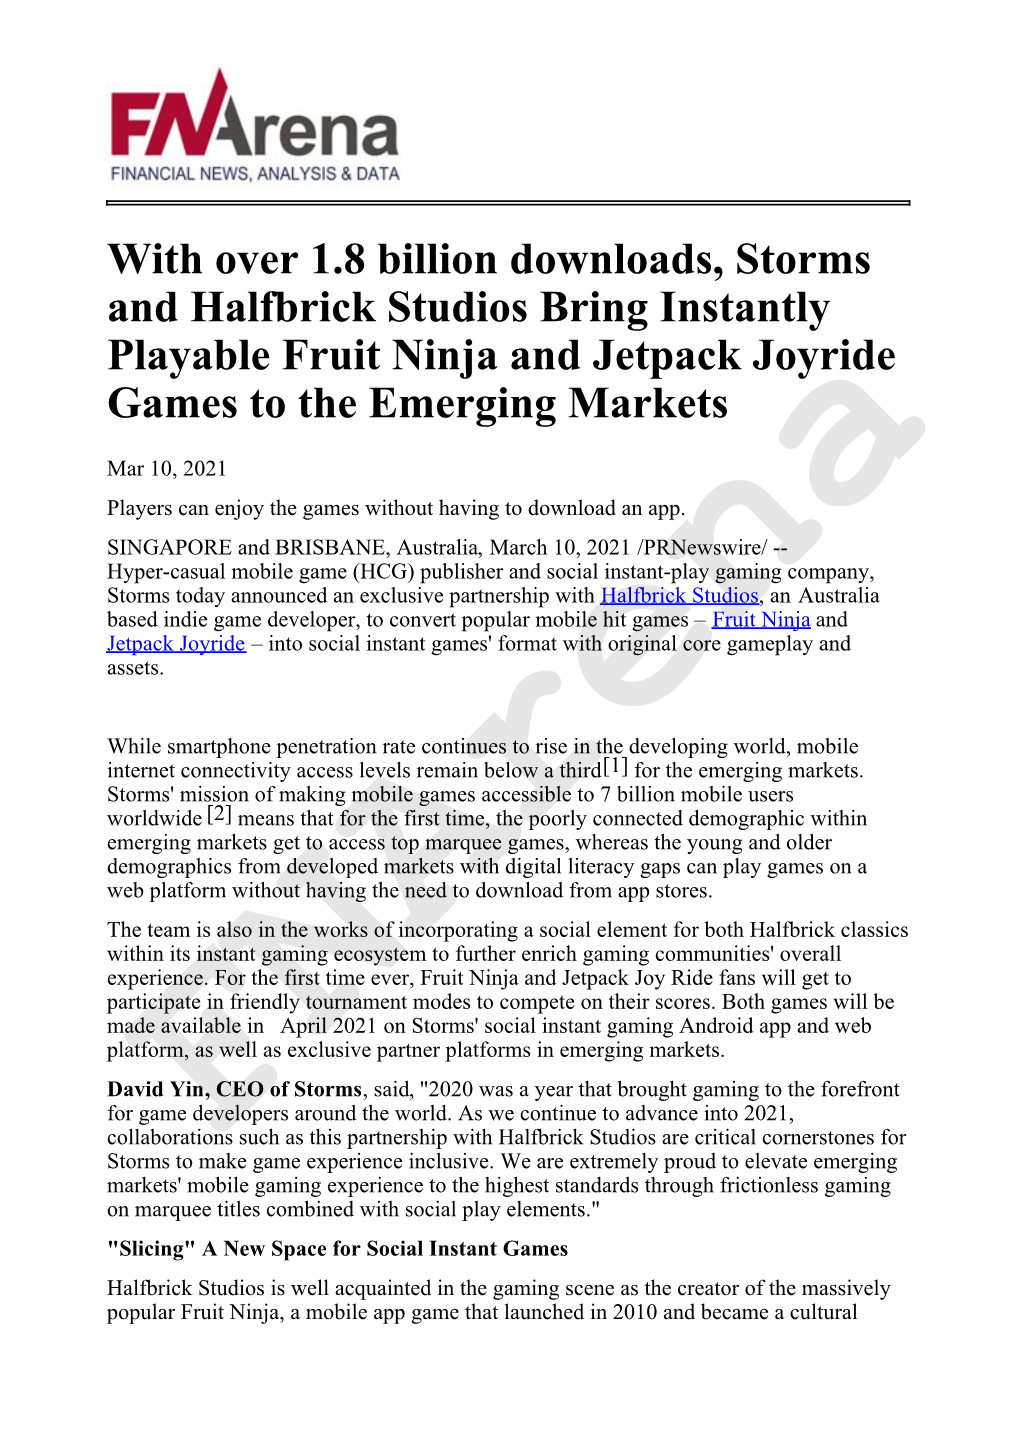 With Over 1.8 Billion Downloads, Storms and Halfbrick Studios Bring Instantly Playable Fruit Ninja and Jetpack Joyride Games to the Emerging Markets